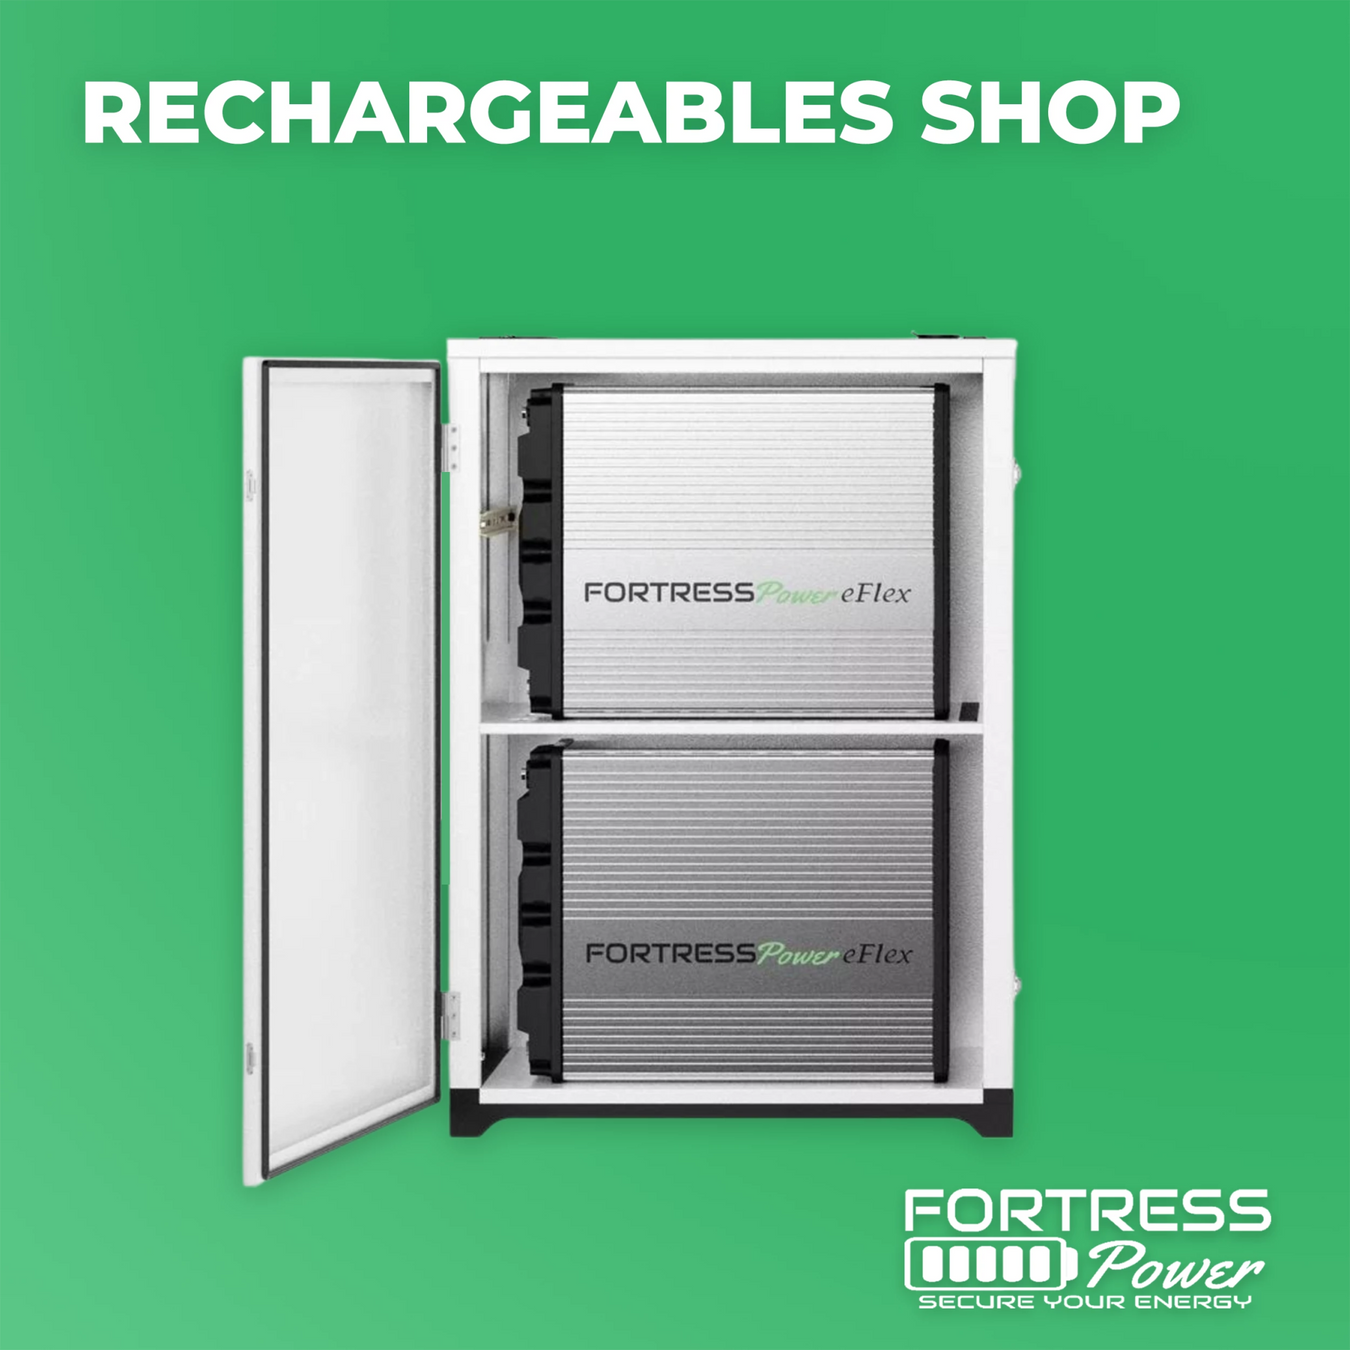 Fortress Power - Rechargeables Shop - PremiumDepot Collection